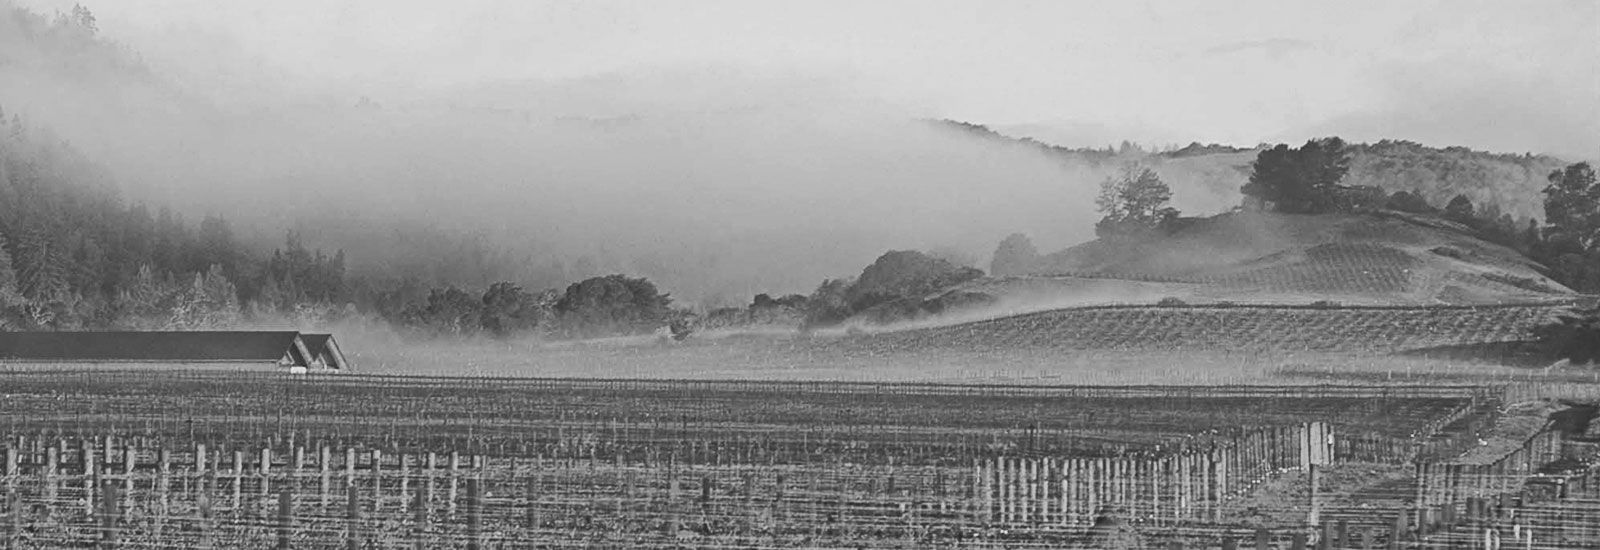 Morning fog nestled in the hills of the Hendry Ranch